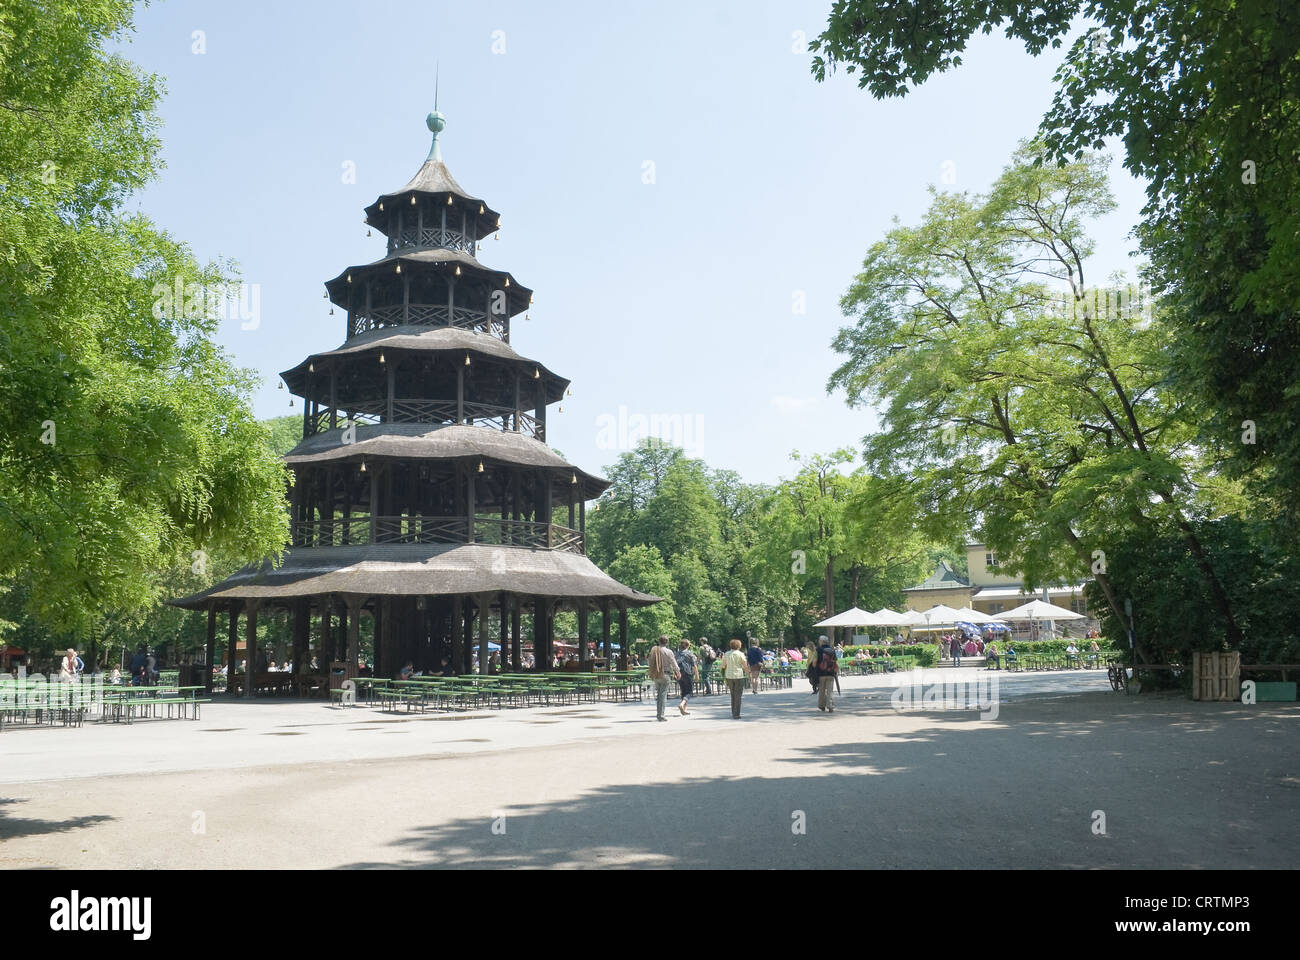 Chinese Tower Beer Garden in Munich Germany Stock Photo